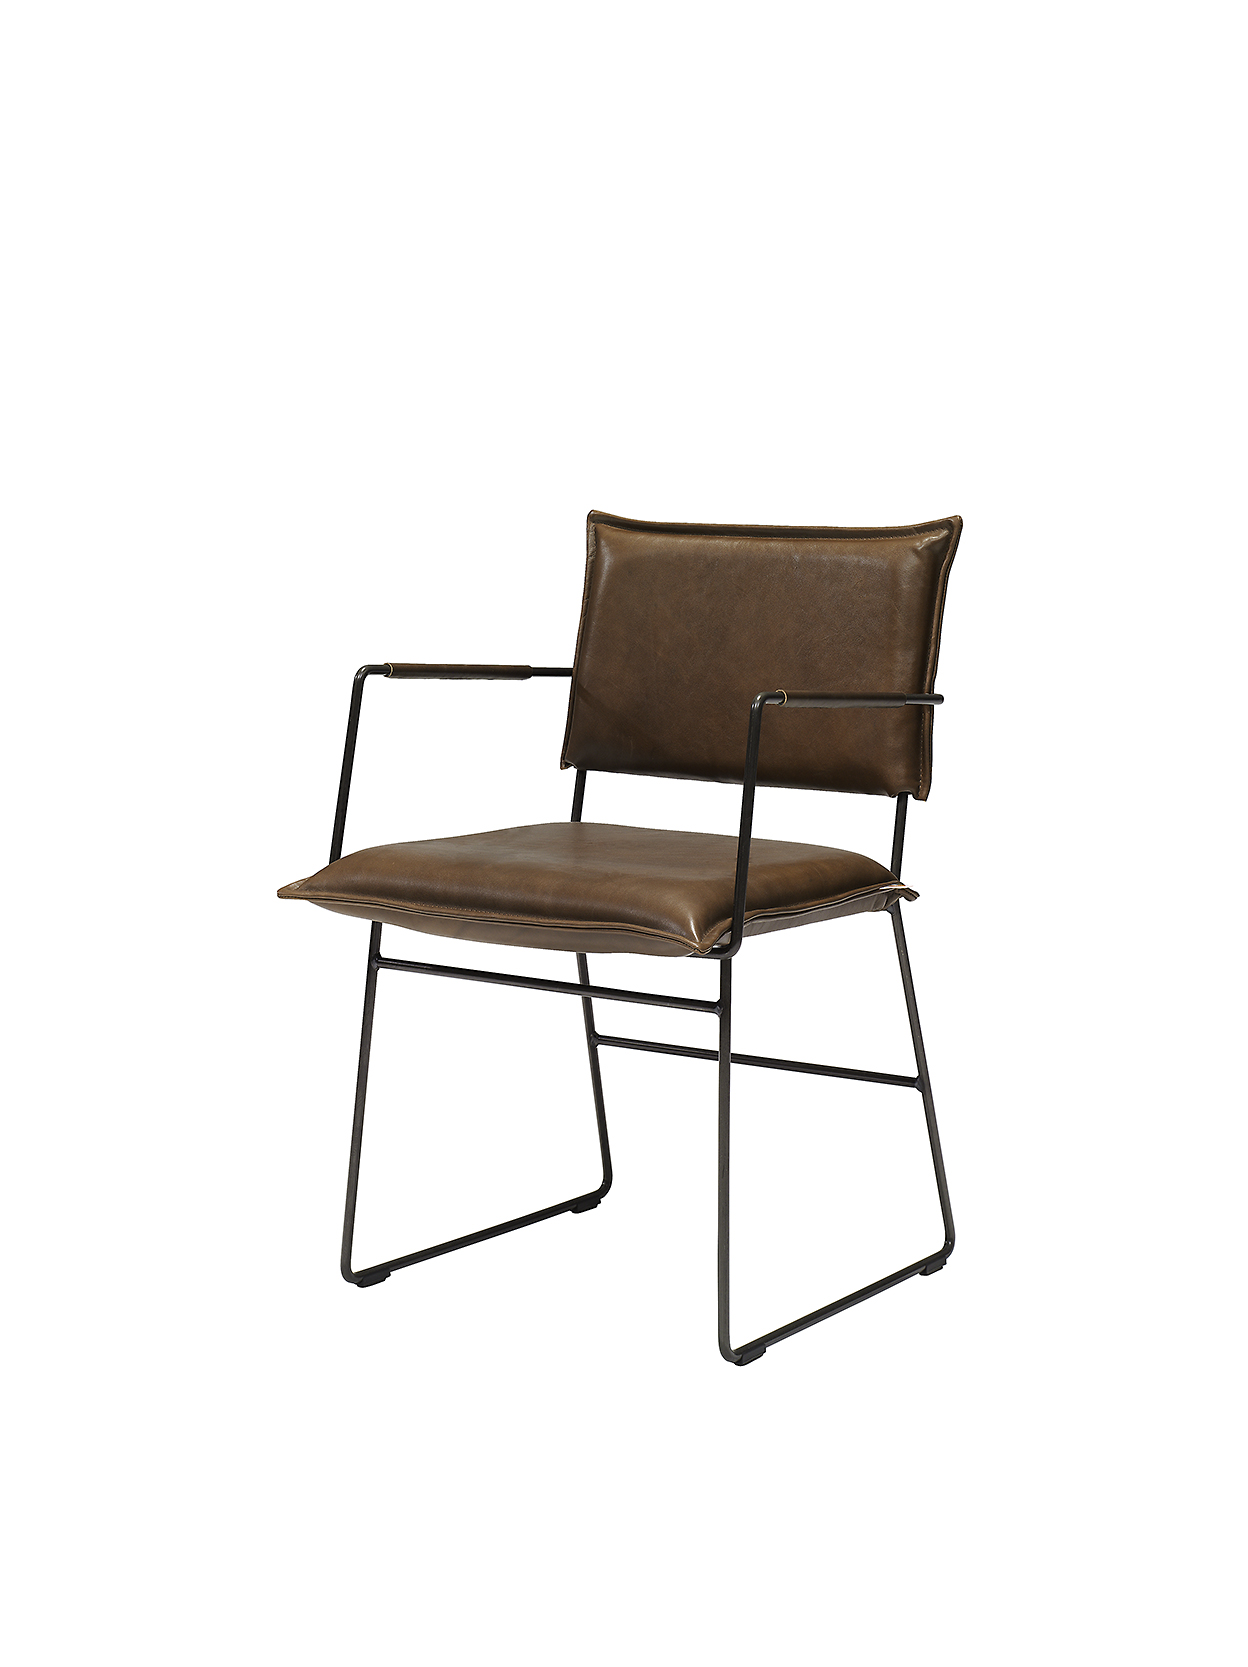 Norman Chair With Arm Luxor Fango Pers LR ZS 8720153744508